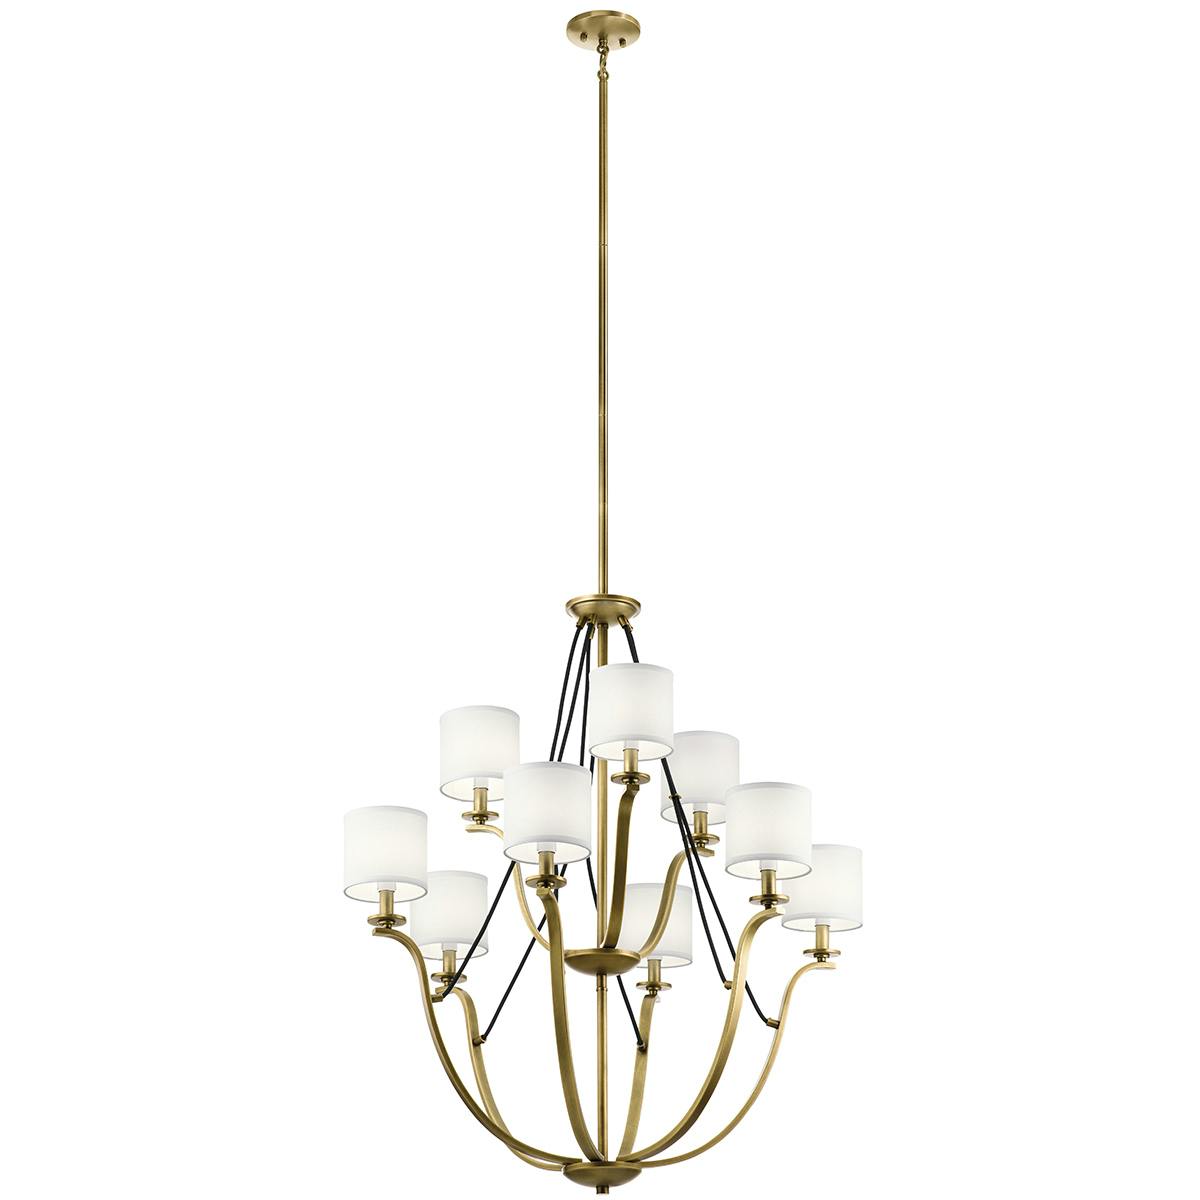 Thisbe 9 Light Chandelier Natural Brass on a white background